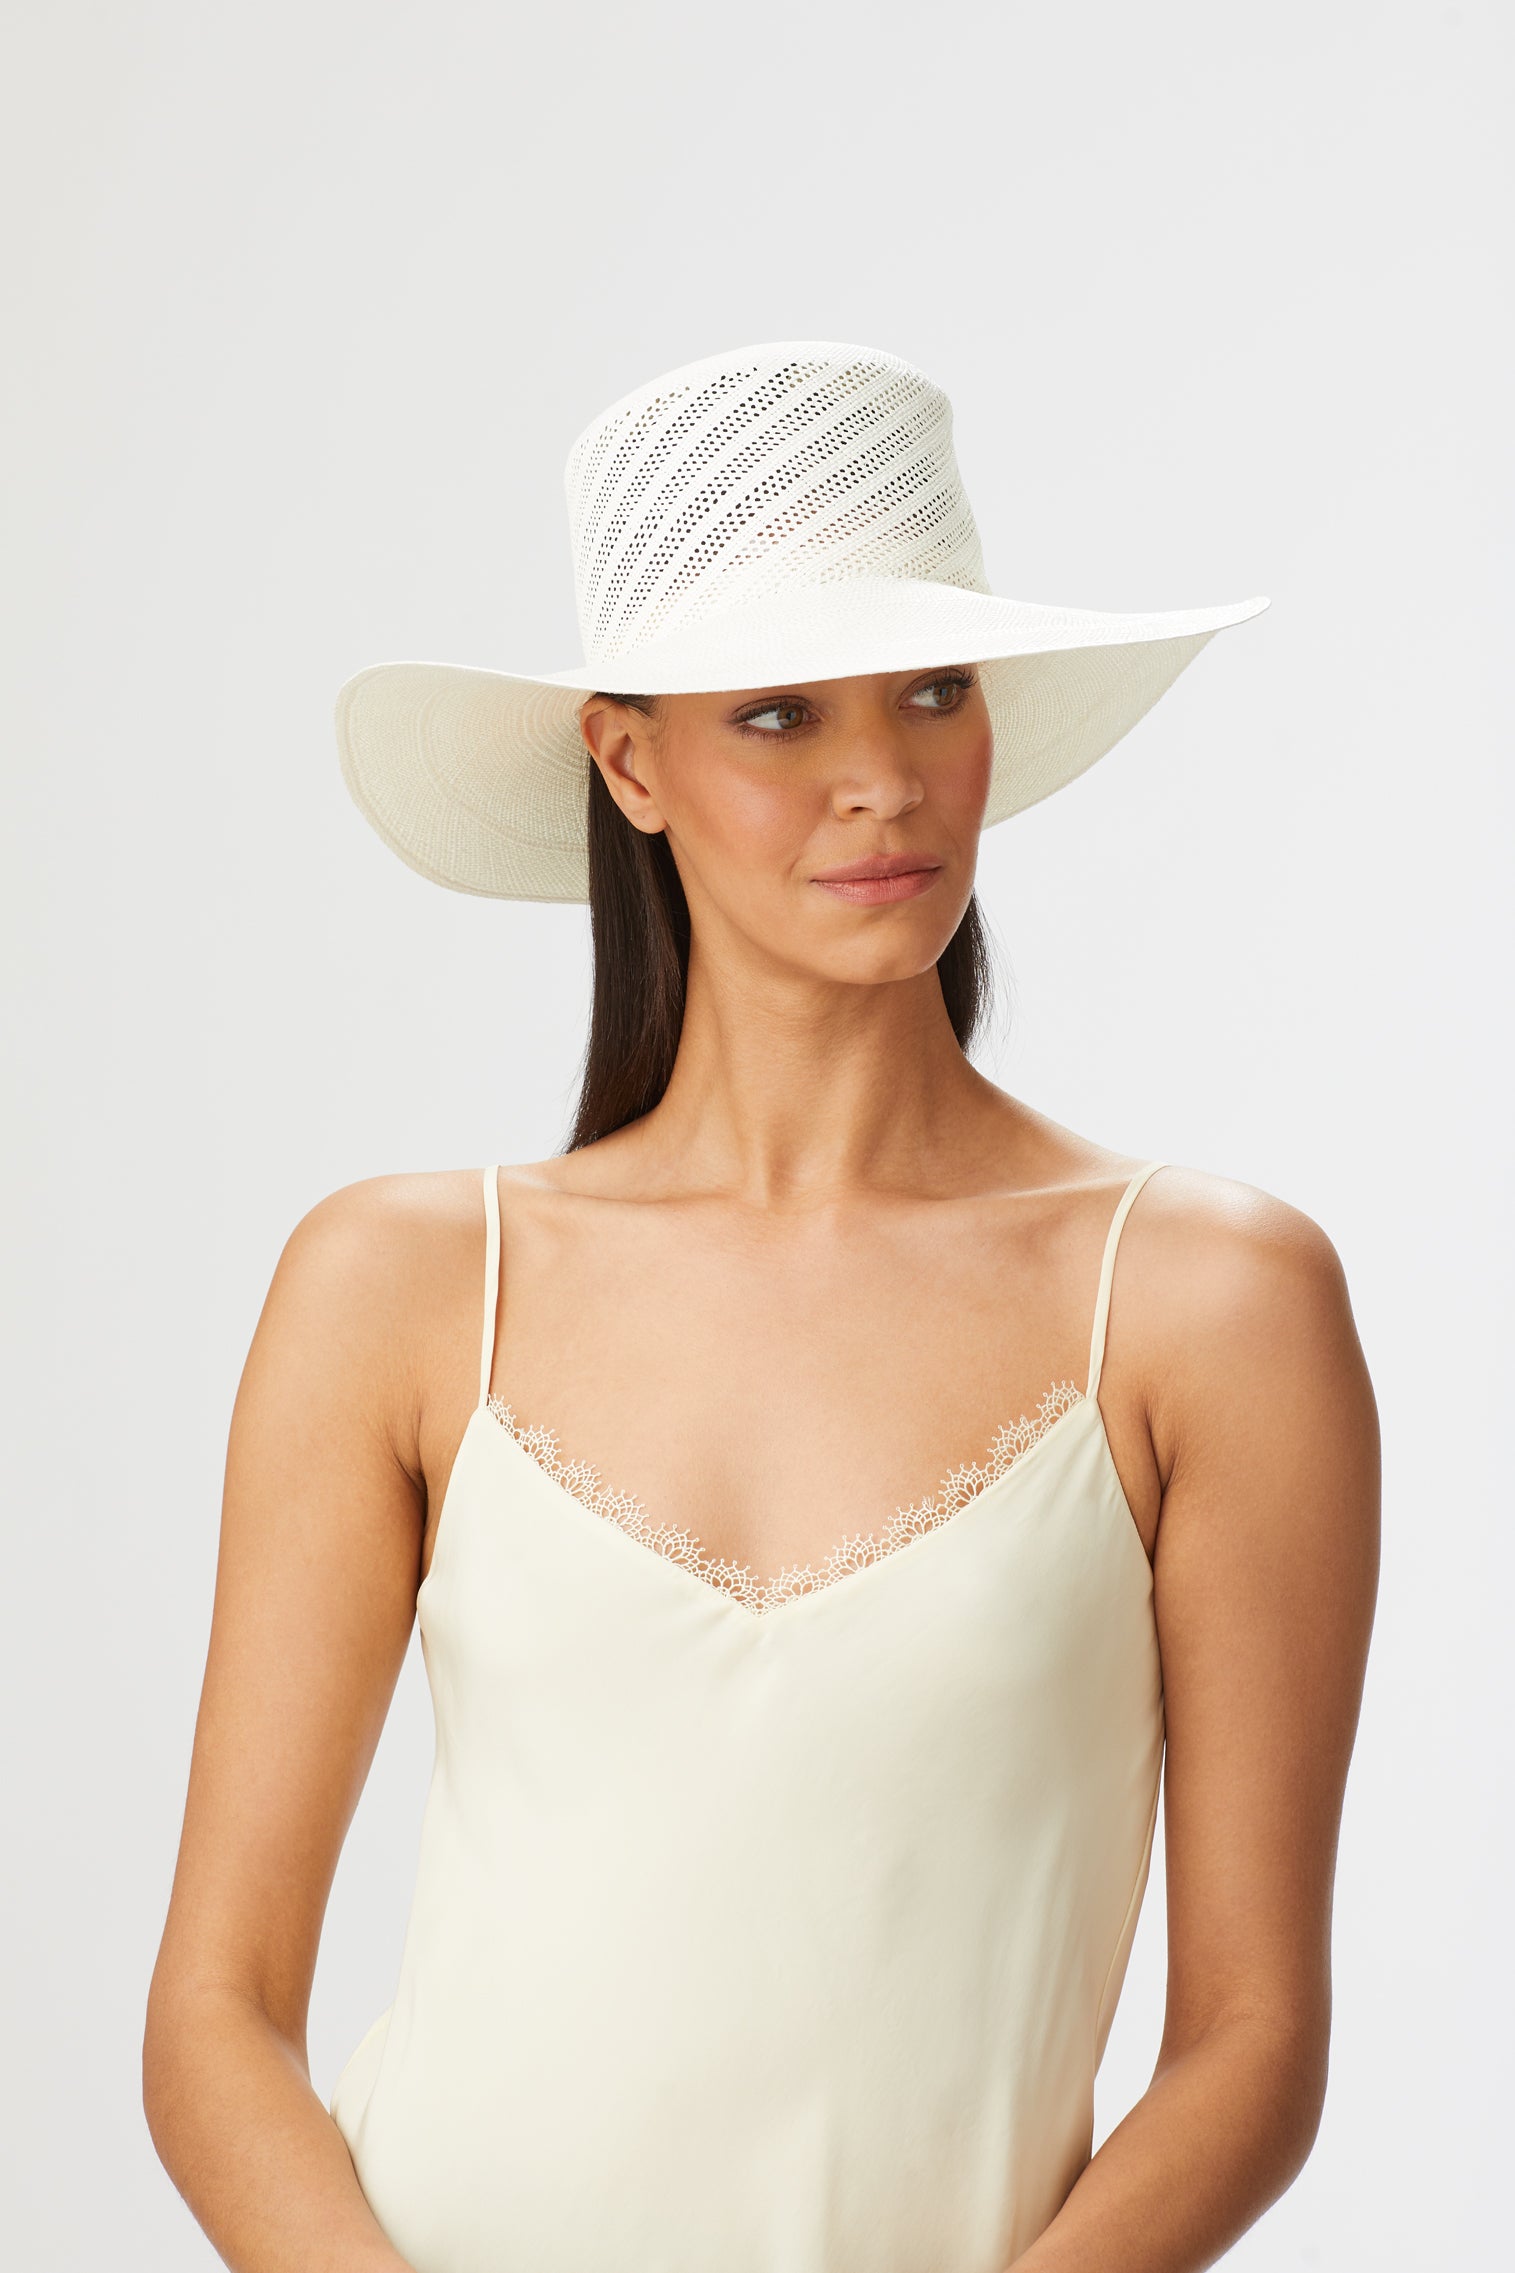 The Andrea - Panamas, Straw and Sun Hats for Women - Lock & Co. Hatters London UK